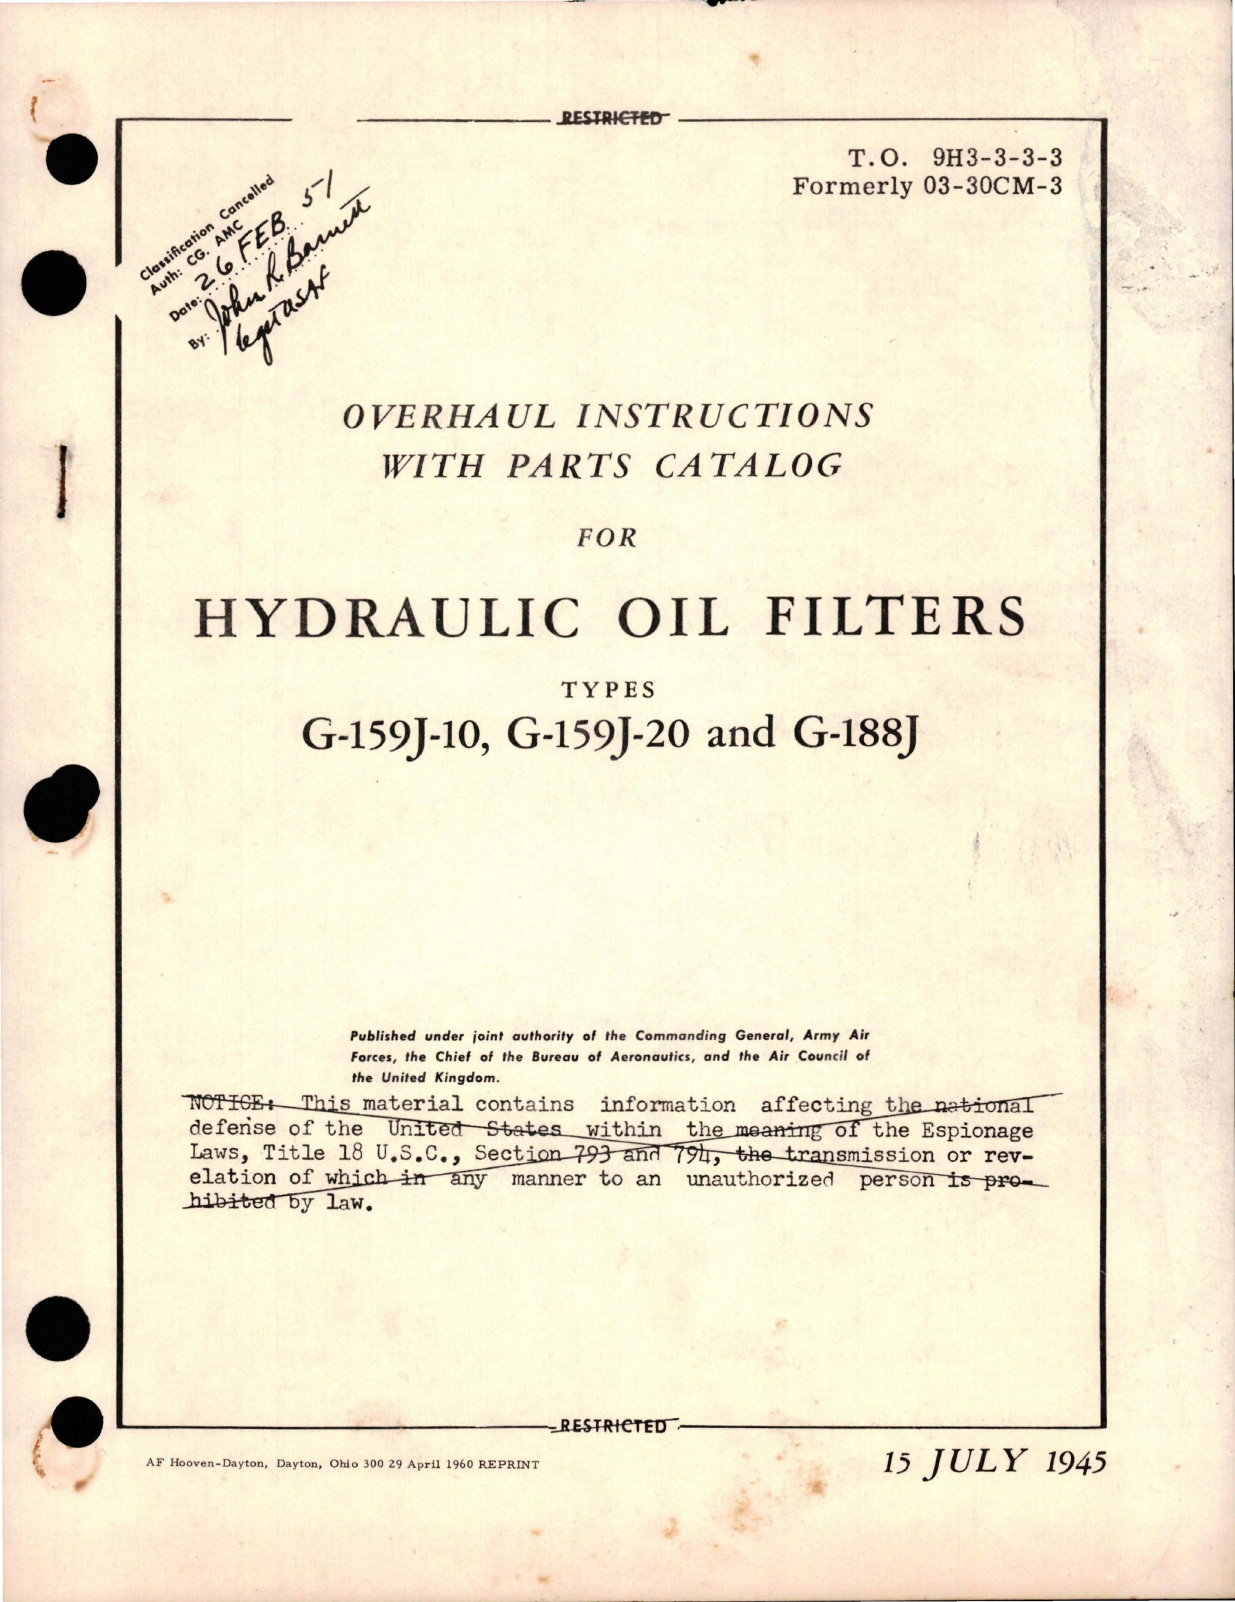 Sample page 1 from AirCorps Library document: Overhaul Instructions with Parts Catalog for Hydraulic Oil Filters - Types G-159J-10, G-159J-20 & G-188J